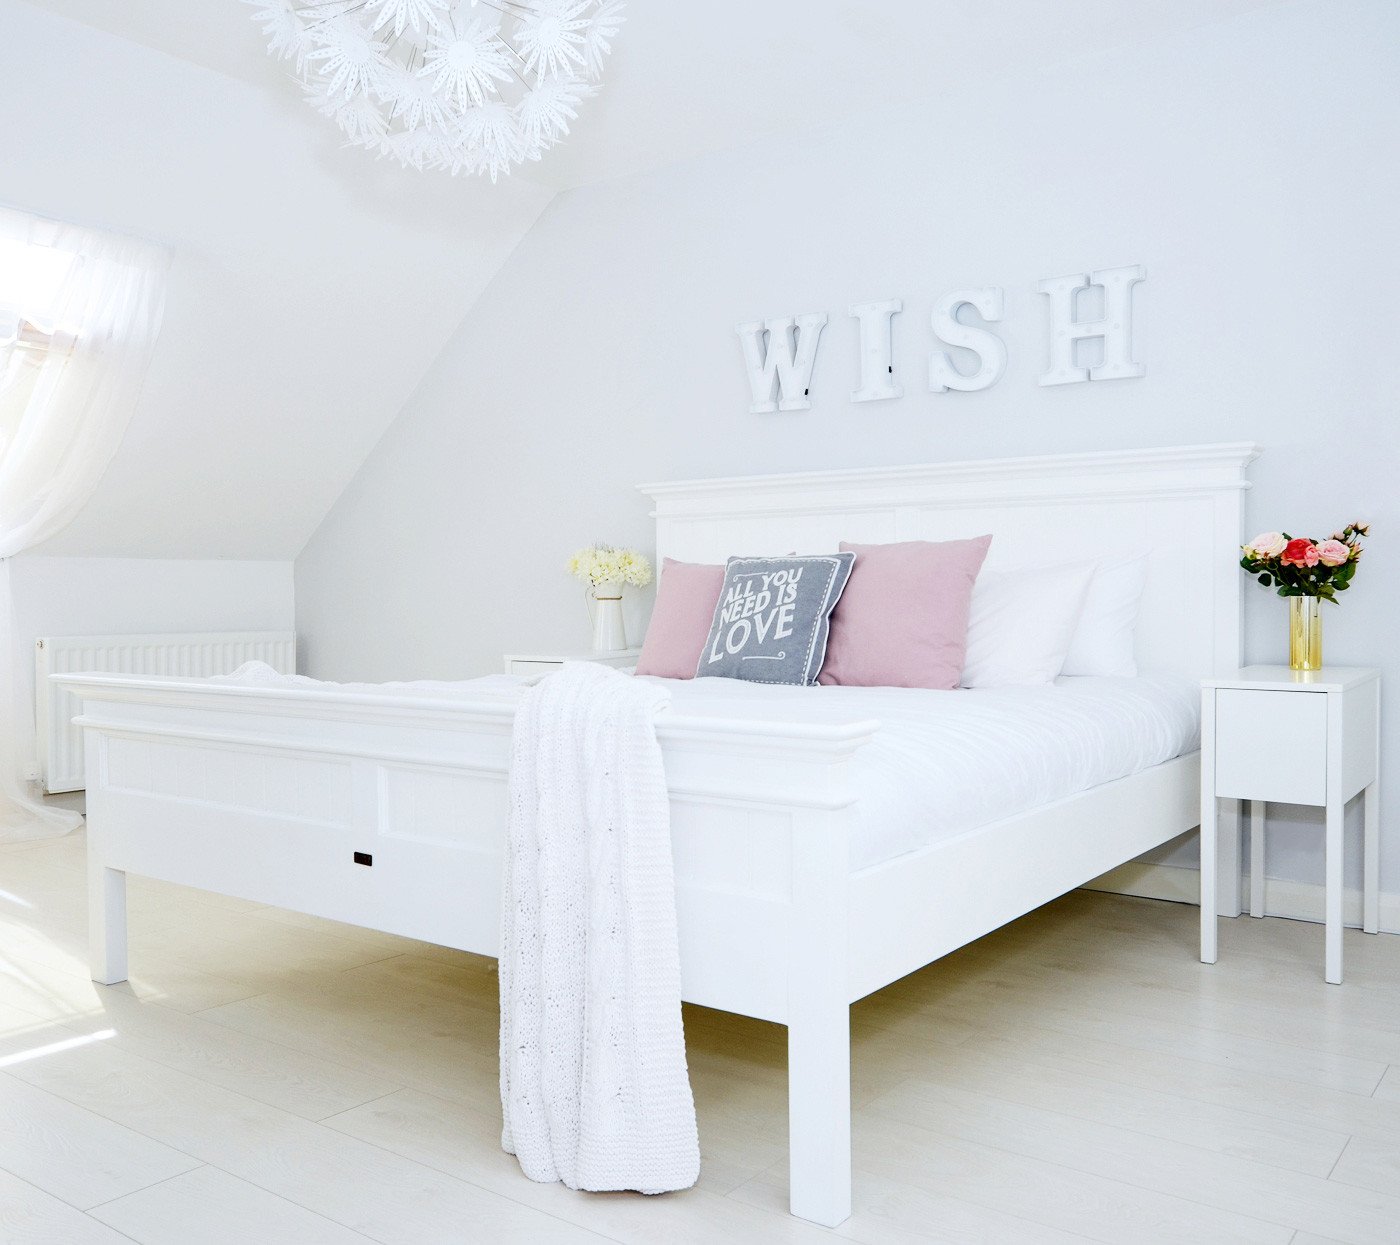 New England Superking bed with WISH sign and pink and grey cushions